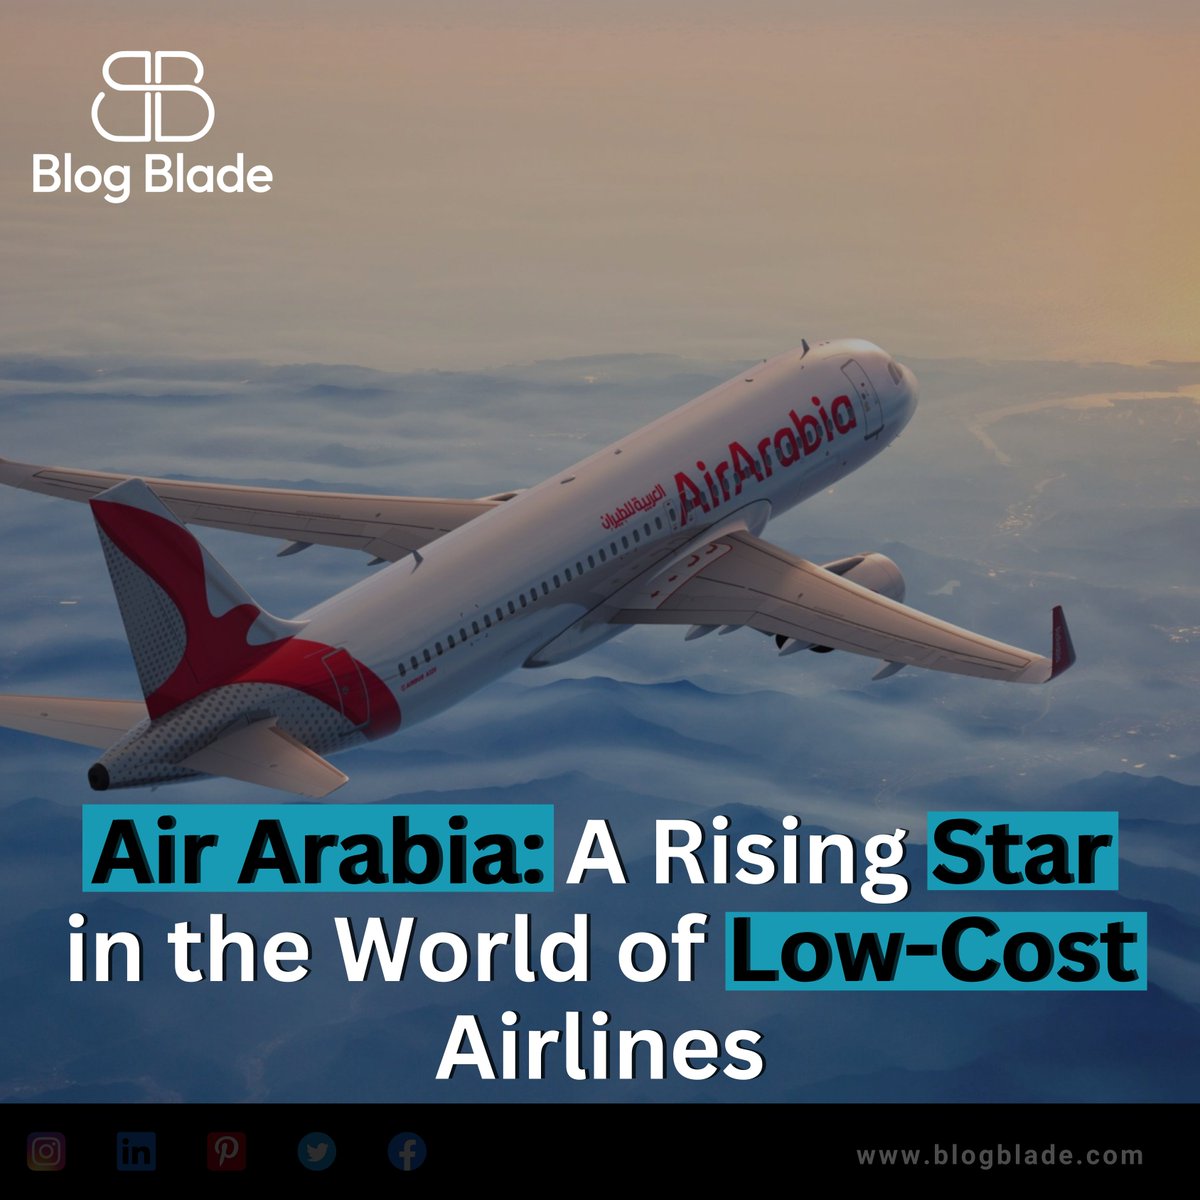 Air Arabia is a Sharjah-based airline that was founded in 2003.
Read More: blogblade.com/low-cost-airli…
#AirArabia
#LowCostAirline
#BudgetTravel
#AffordableAirTravel
#NoFrillsAirline
#AirbusA320
#TravelExperience
#SkytraxAwards
#FinancialPerformance
#ModernFleet